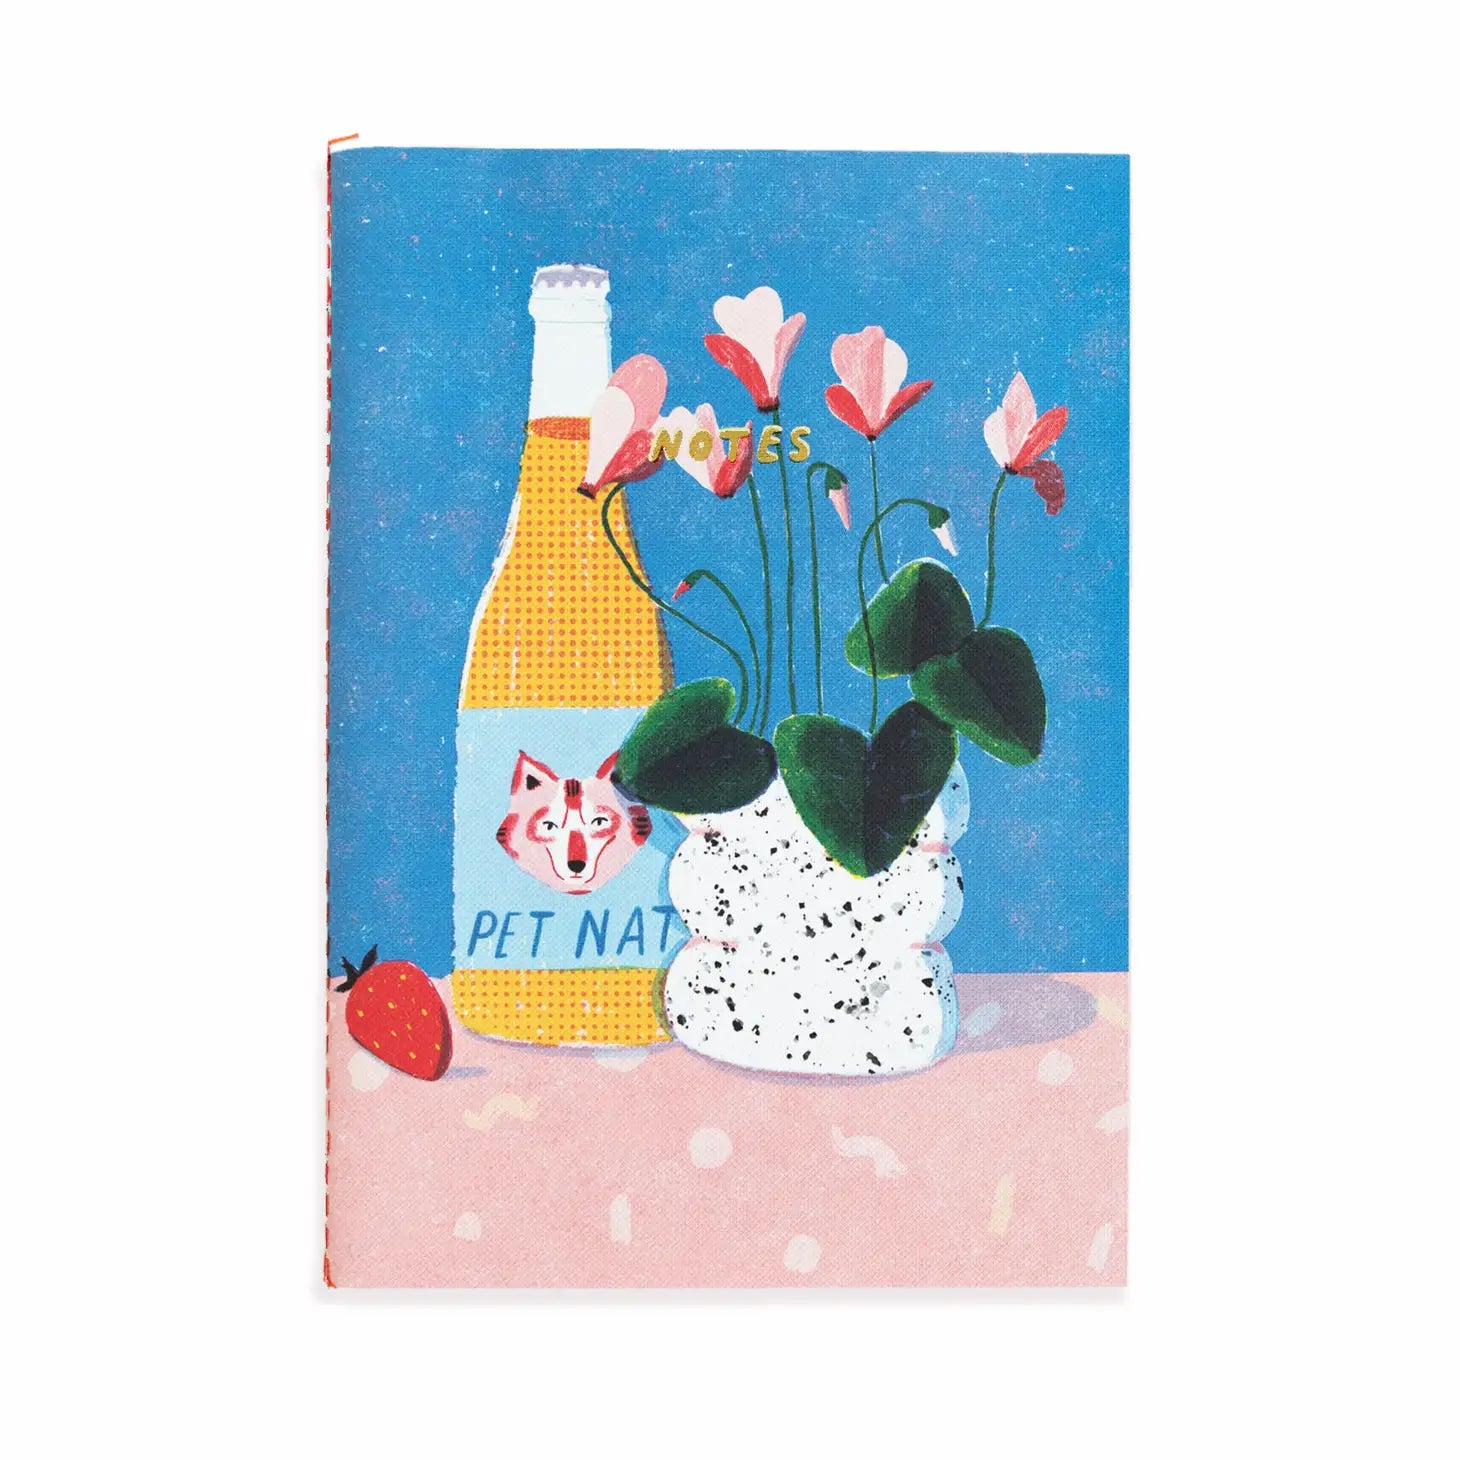 Stitch binded notebook. Image on front is a strawberry, bottle, and terrazzo planter with flowers inside on  a table. Top center of notebook reads "Notes"